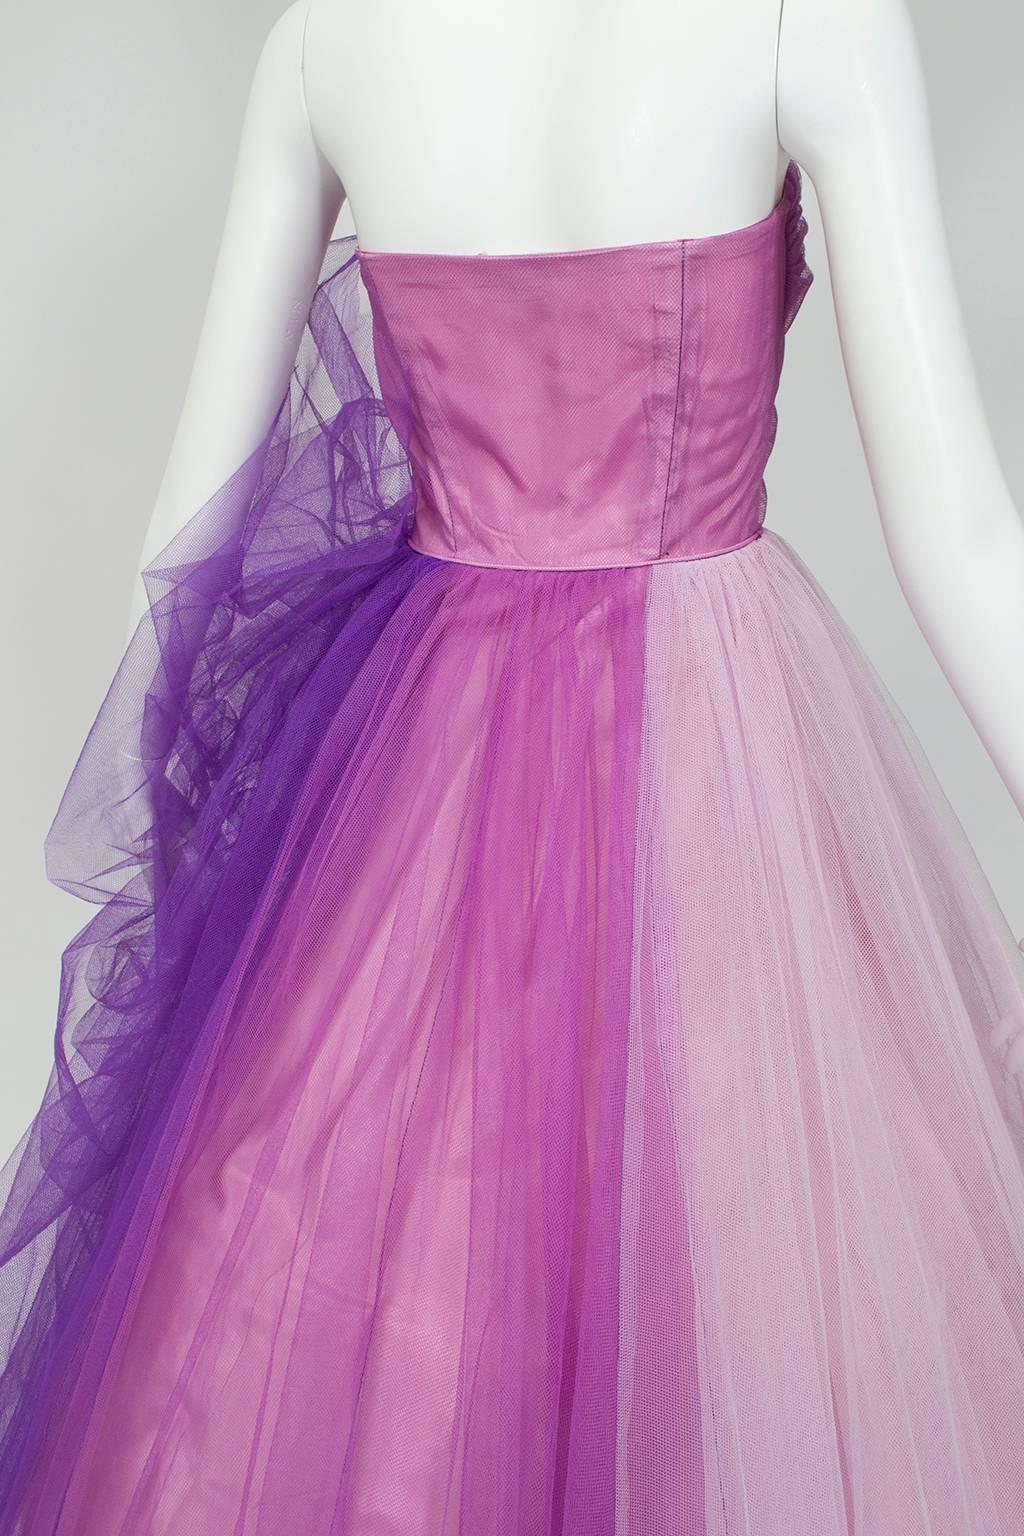 Emma Domb Violet Ombré Strapless Ball Gown, 1950s 1